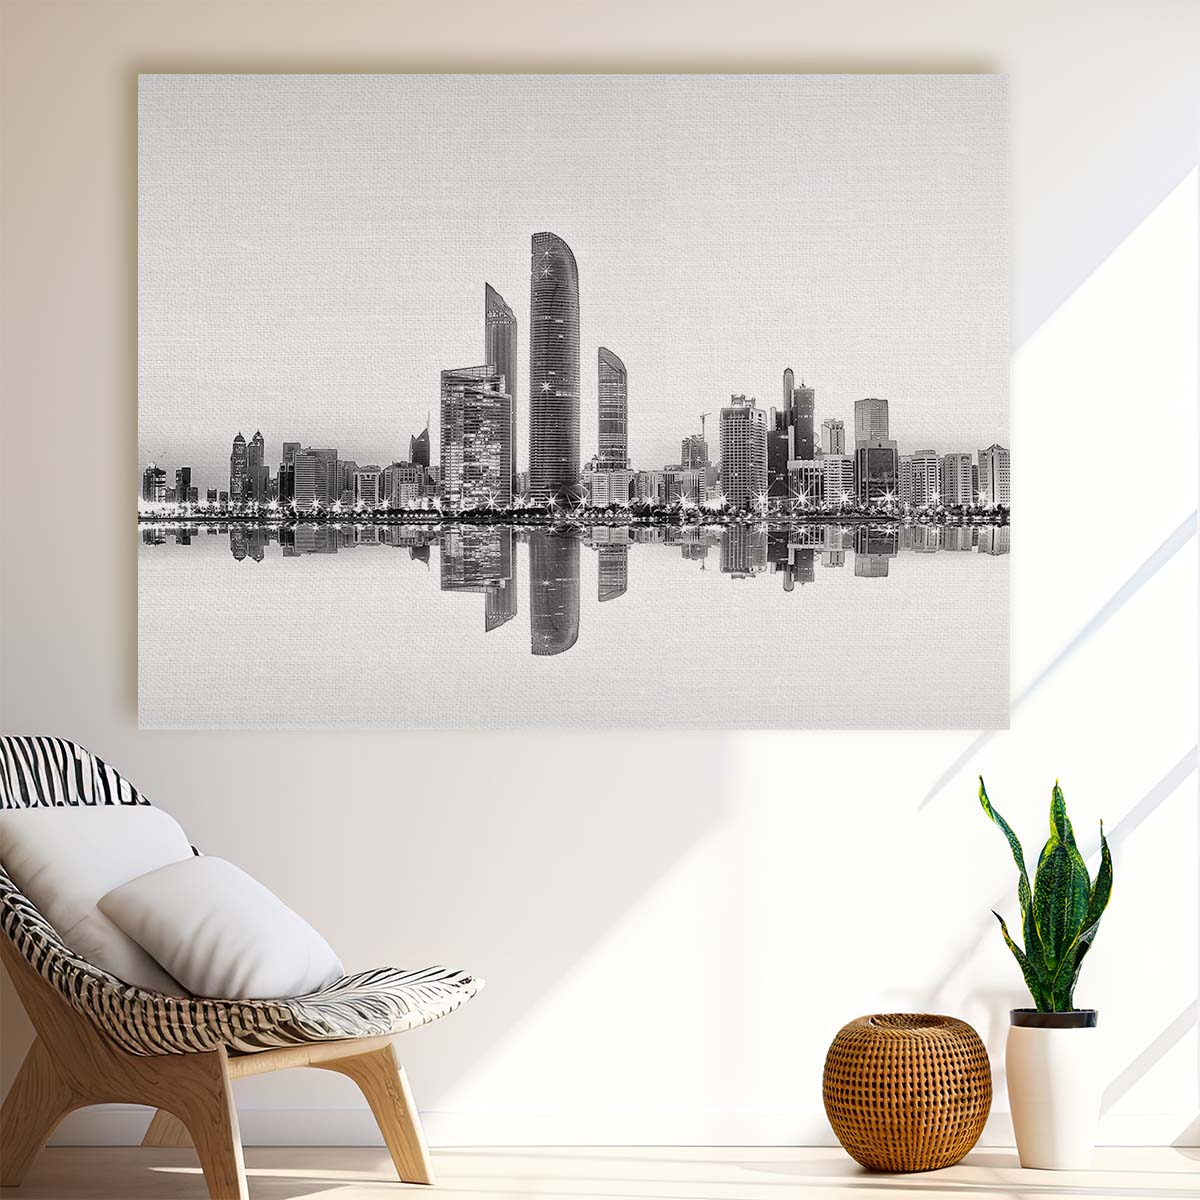 Abu Dhabi Skyline Reflections Monochrome Wall Art by Luxuriance Designs. Made in USA.